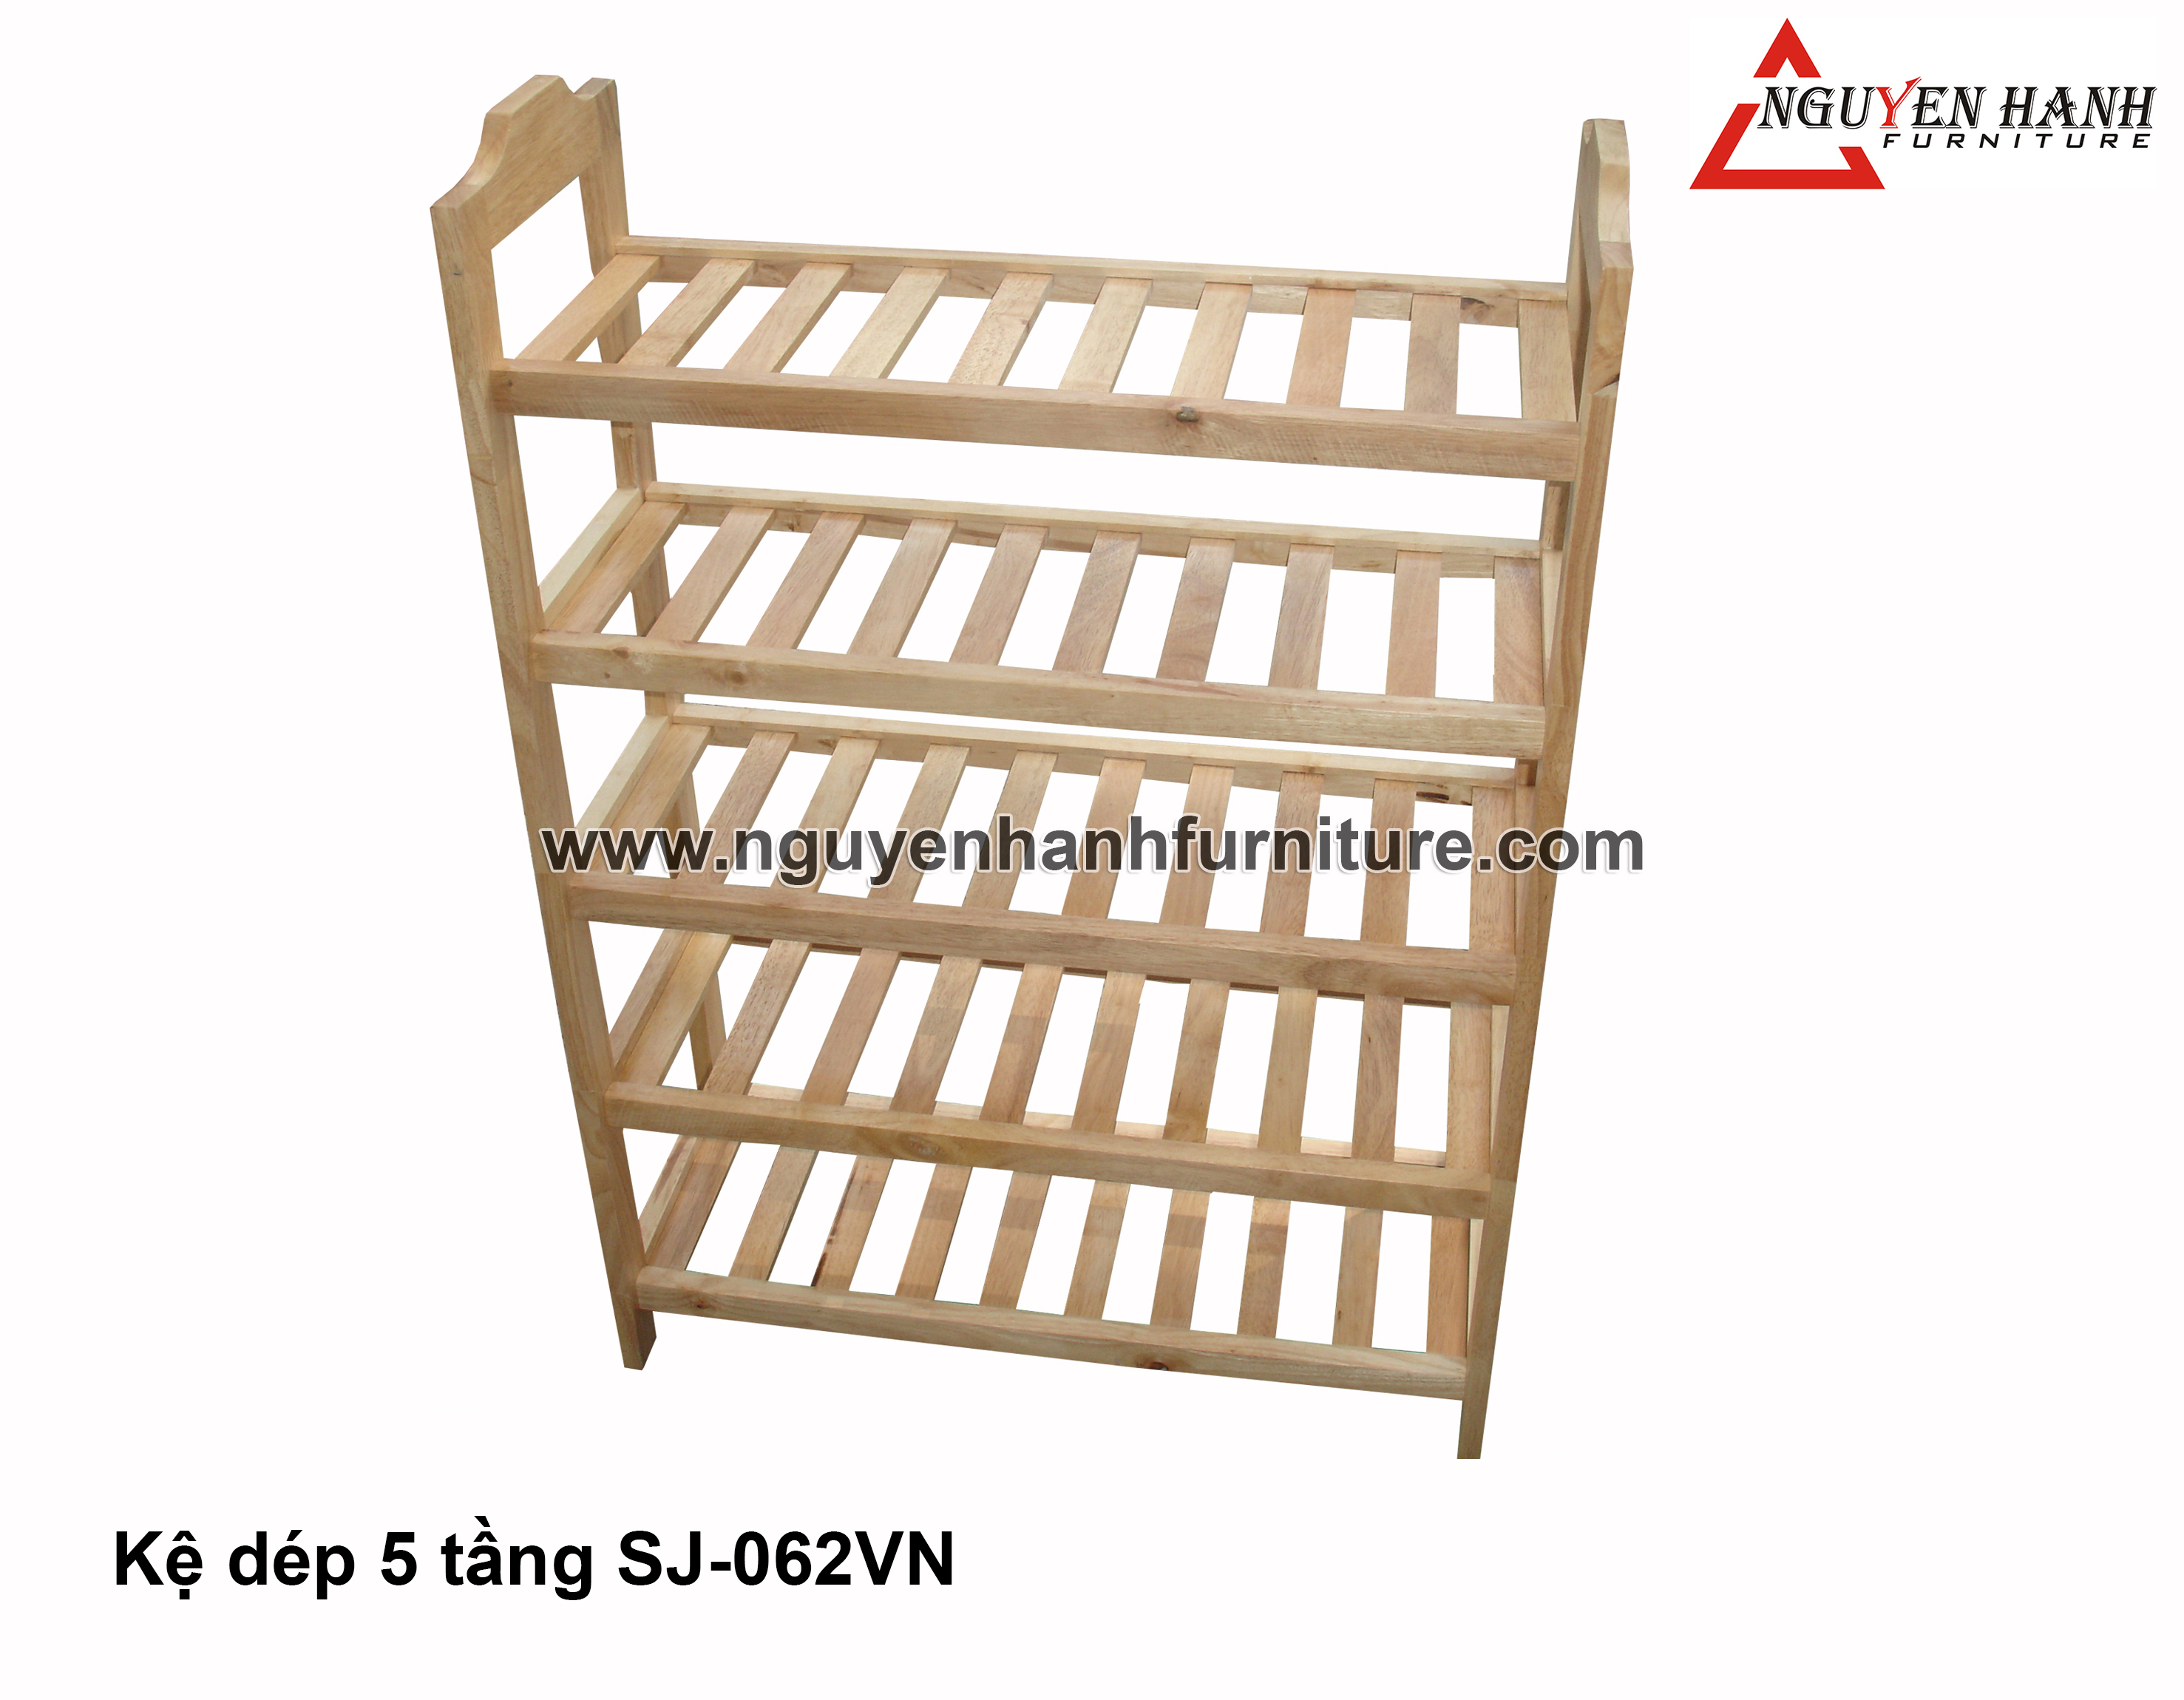 Name product: Shoe shelf with thin blades 5 floor - Dimensions: 100x67x27 cm - Description: Wood natural rubber